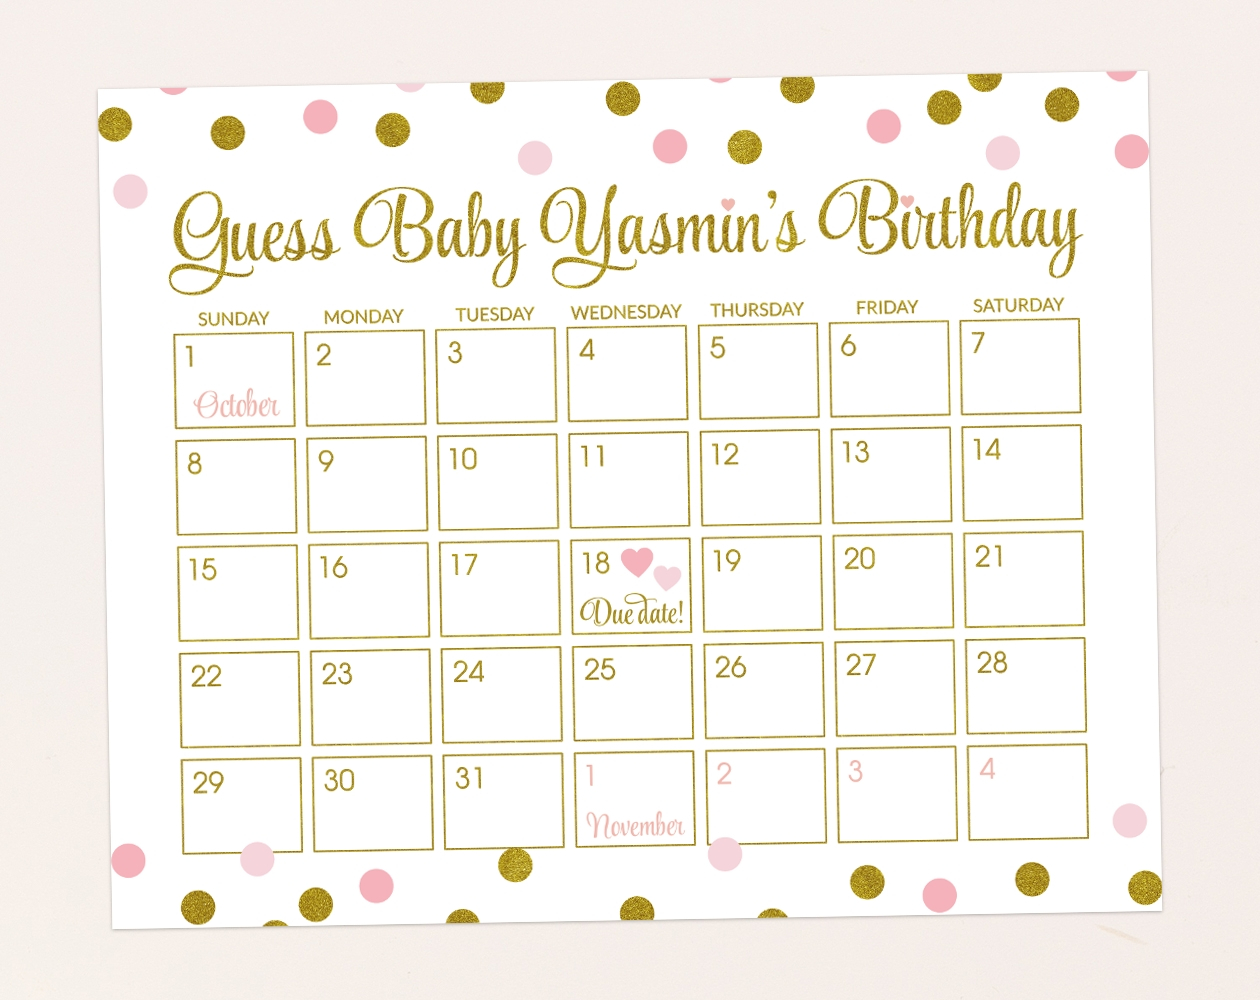 Guess The Date Babyparty | Calendar Template 2020